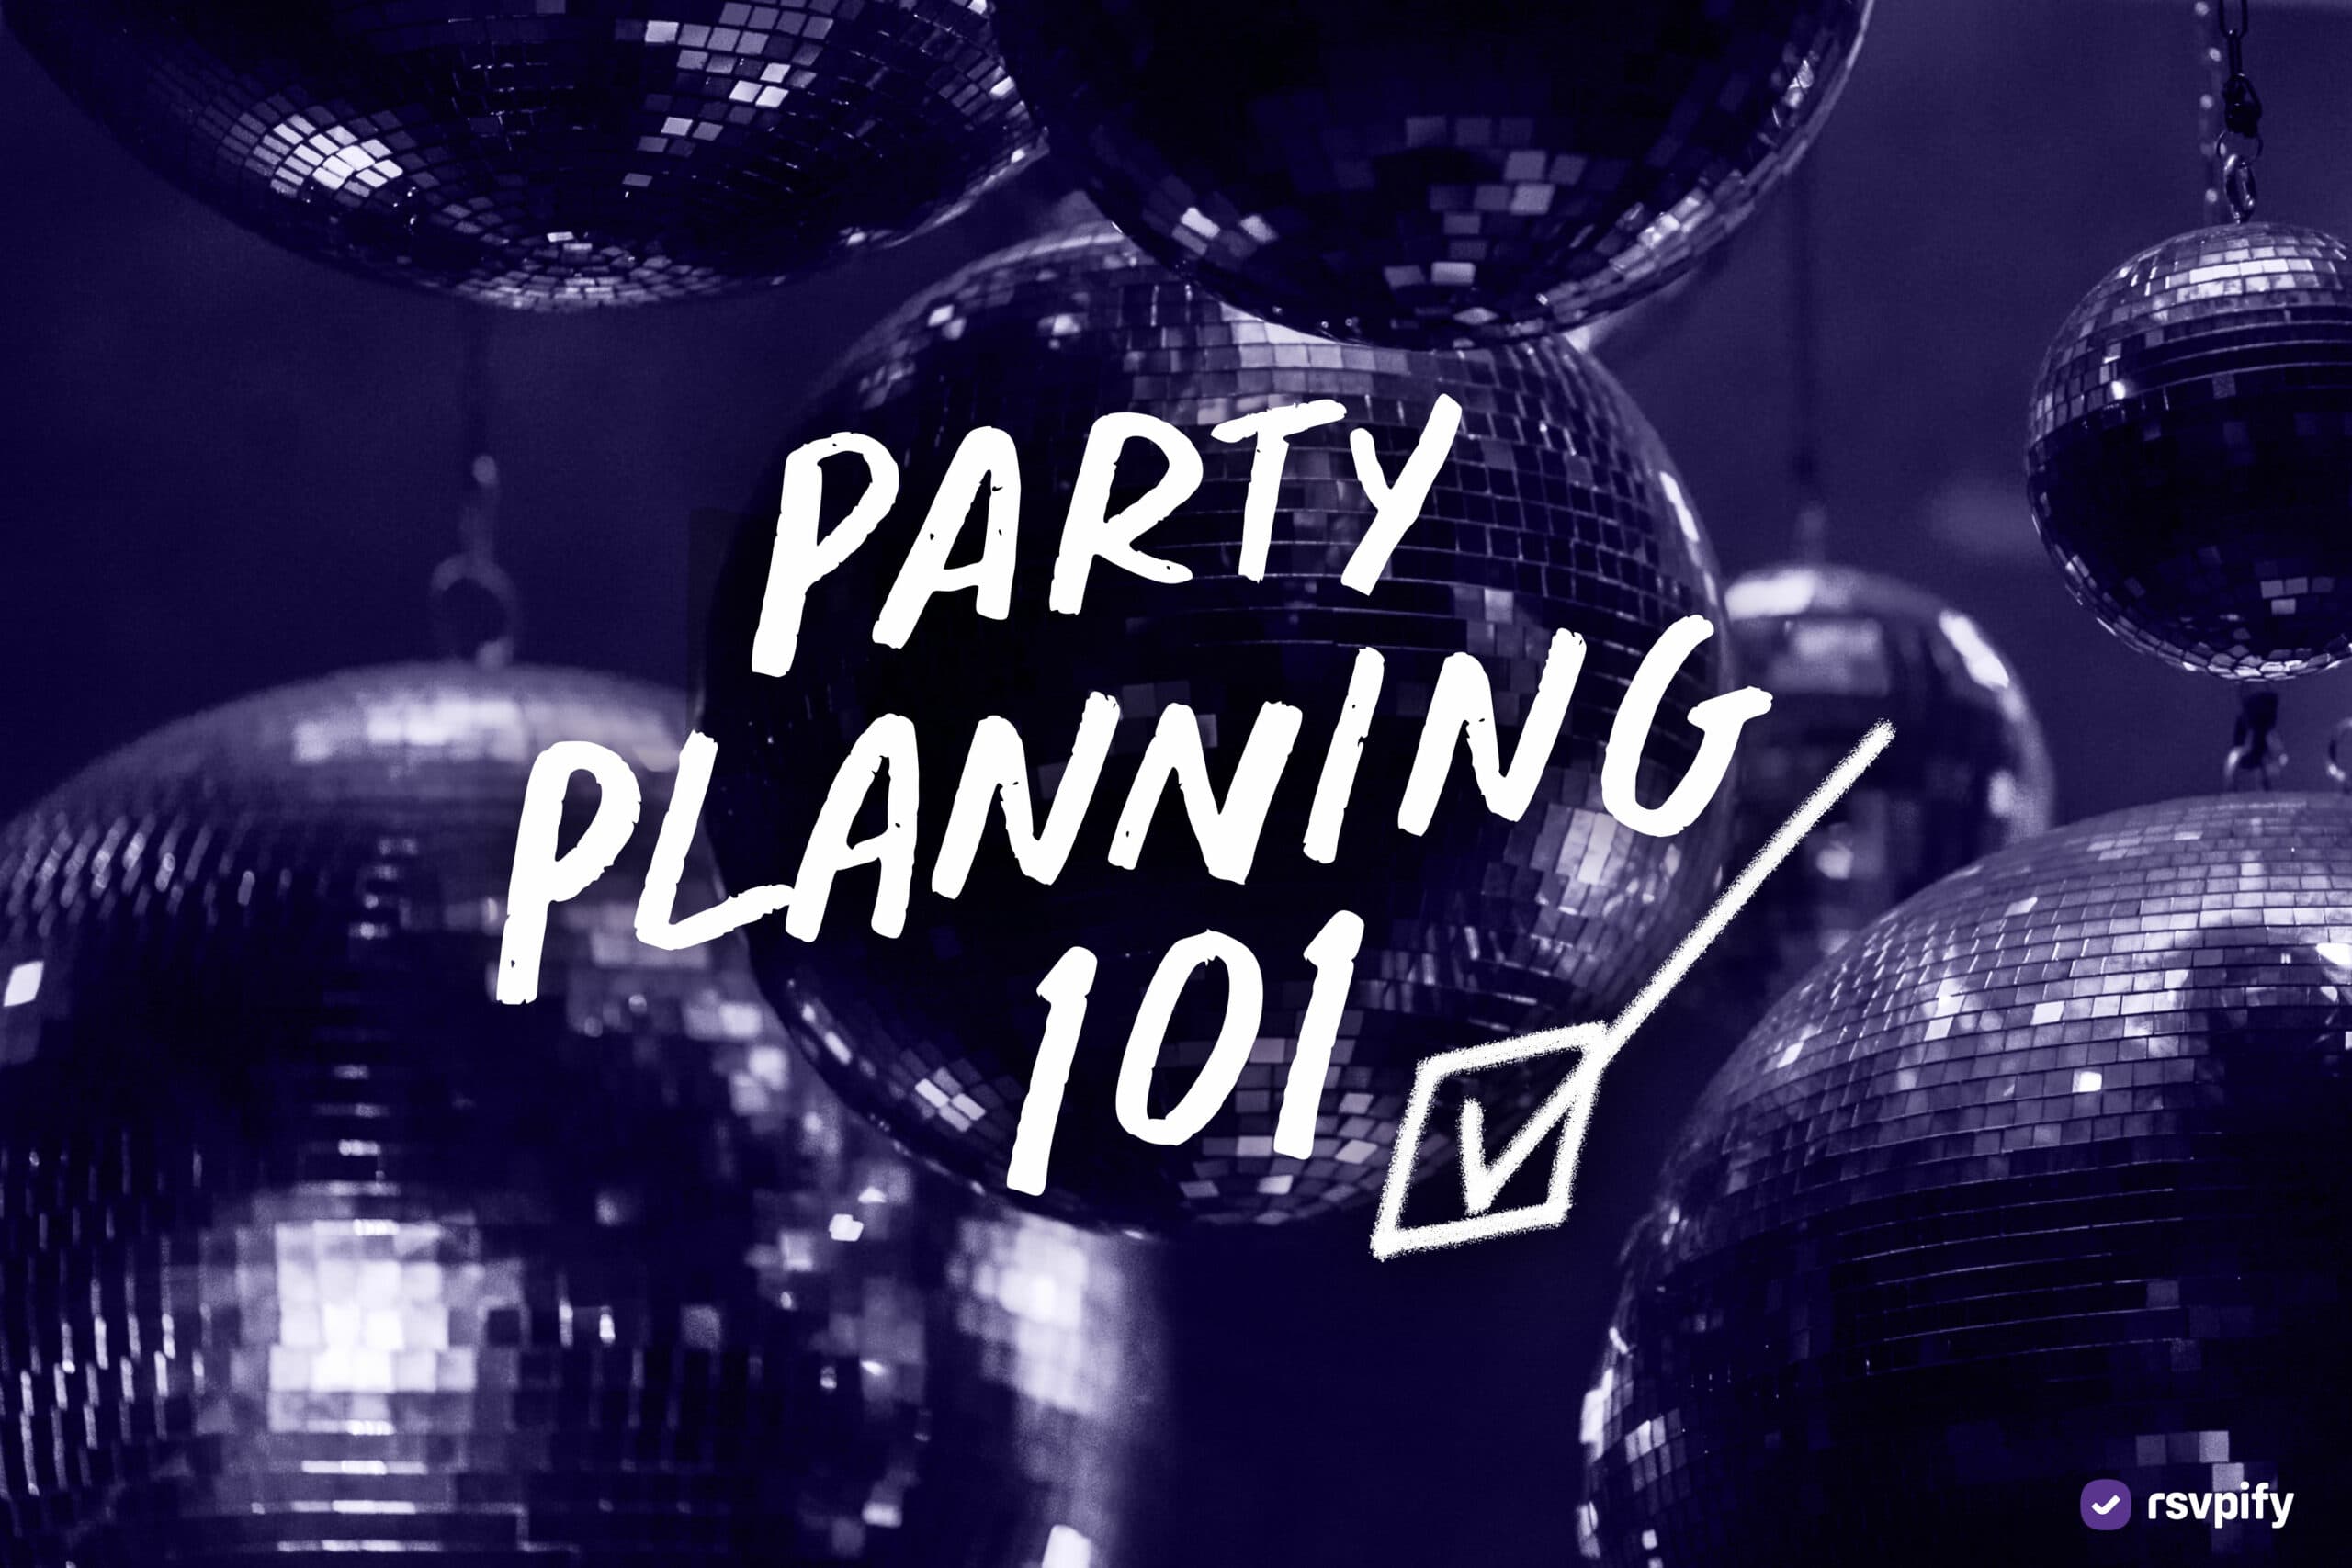 Looking for the best app for party planning? Here are some great options